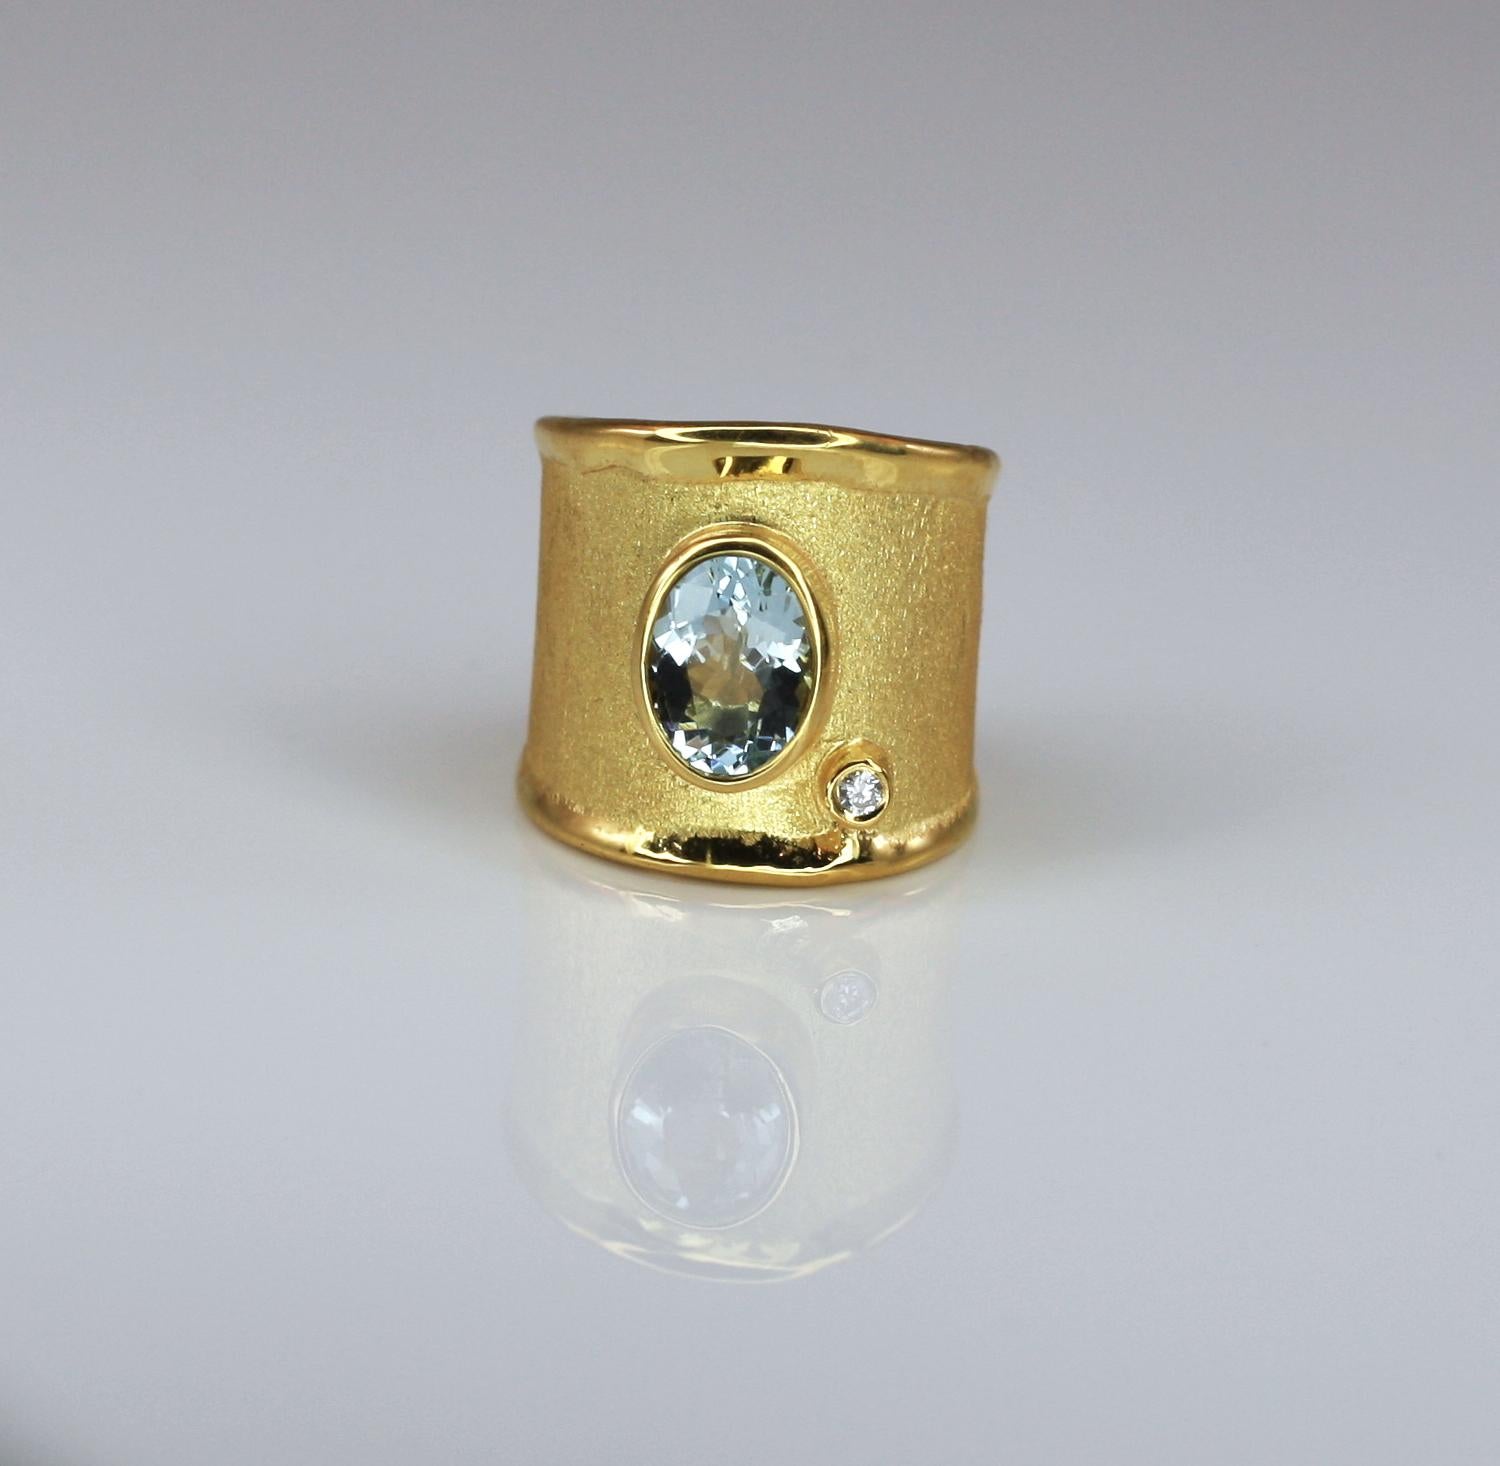 Yianni Creations artisan gorgeous ring handmade in Greece from 18 Karat Yellow Gold. We, in YC, use special techniques of craftsmanship - the brushed texture and nature-inspired liquid edges. These together make a perfect match with 1.75 Carat oval